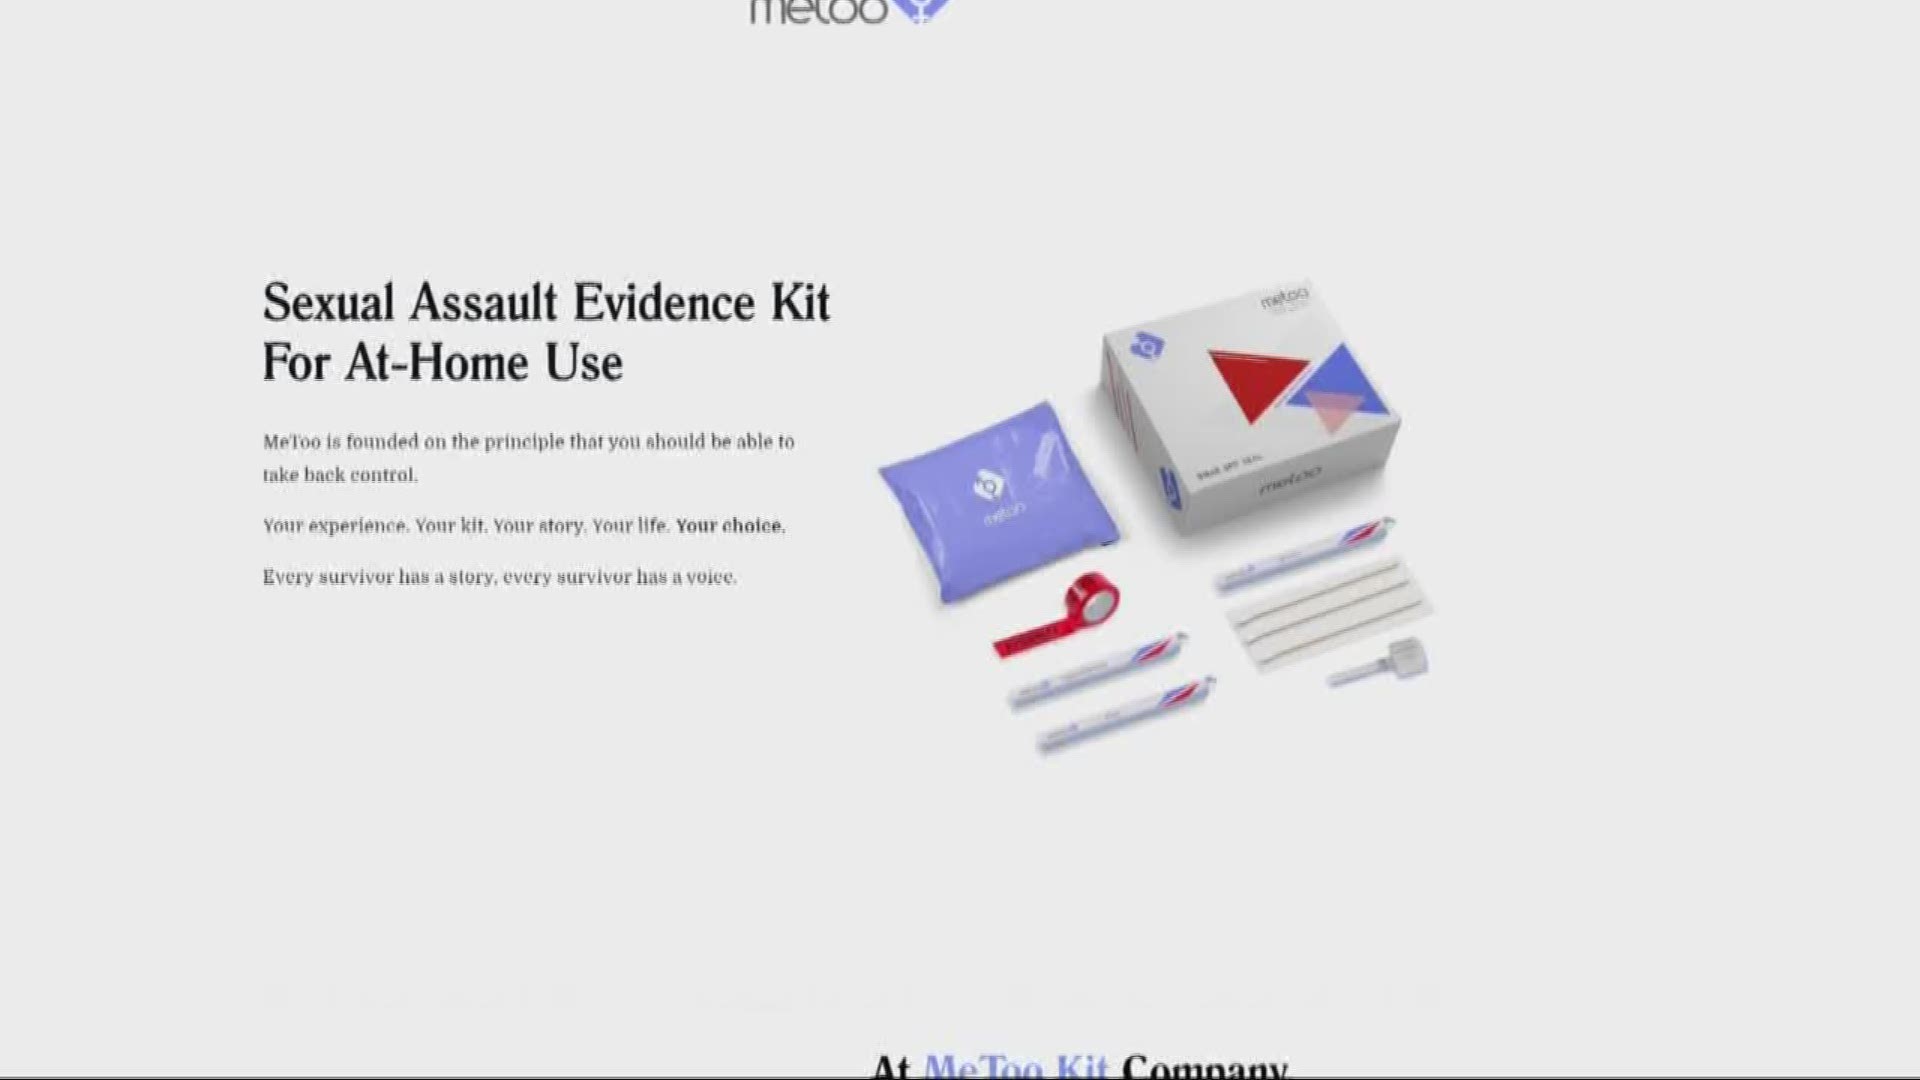 NY company selling at-home rape kits, but anti-sexual violence groups and attorneys general are outraged.